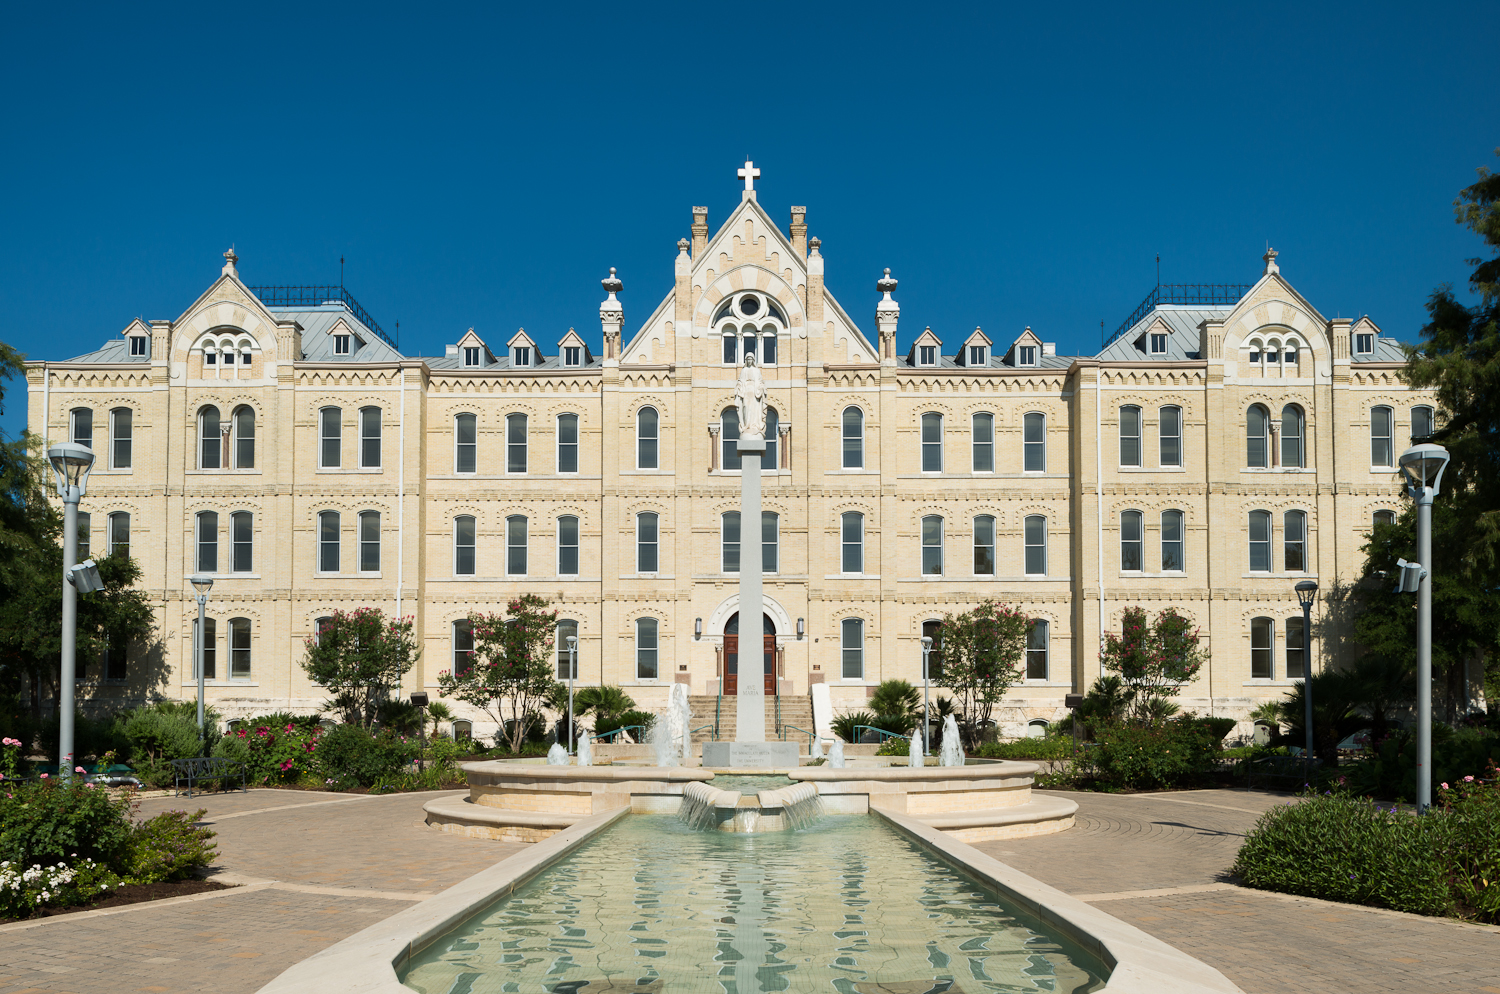 St. Mary’s University is the first institution of higher education in Texas and the 28th in the nation to achieve Fair Trade University status.